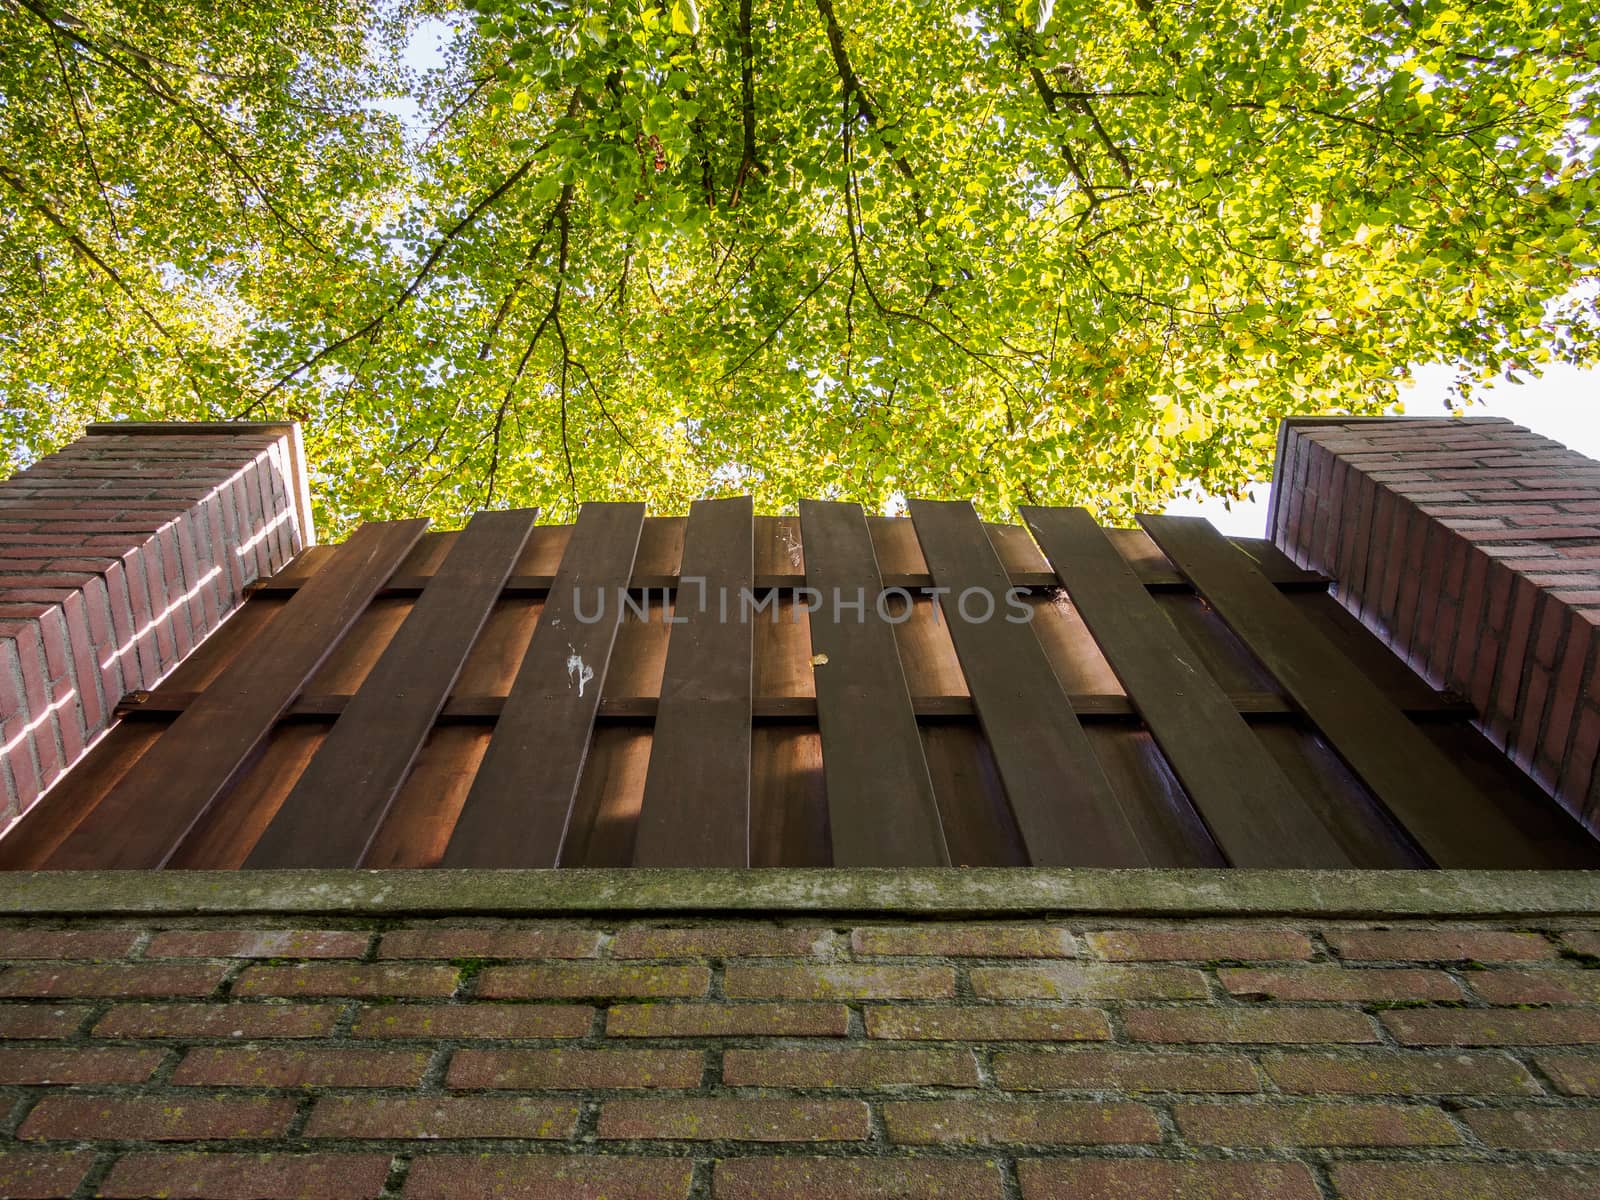 Looking up at trees past a brick wall and wooden fence